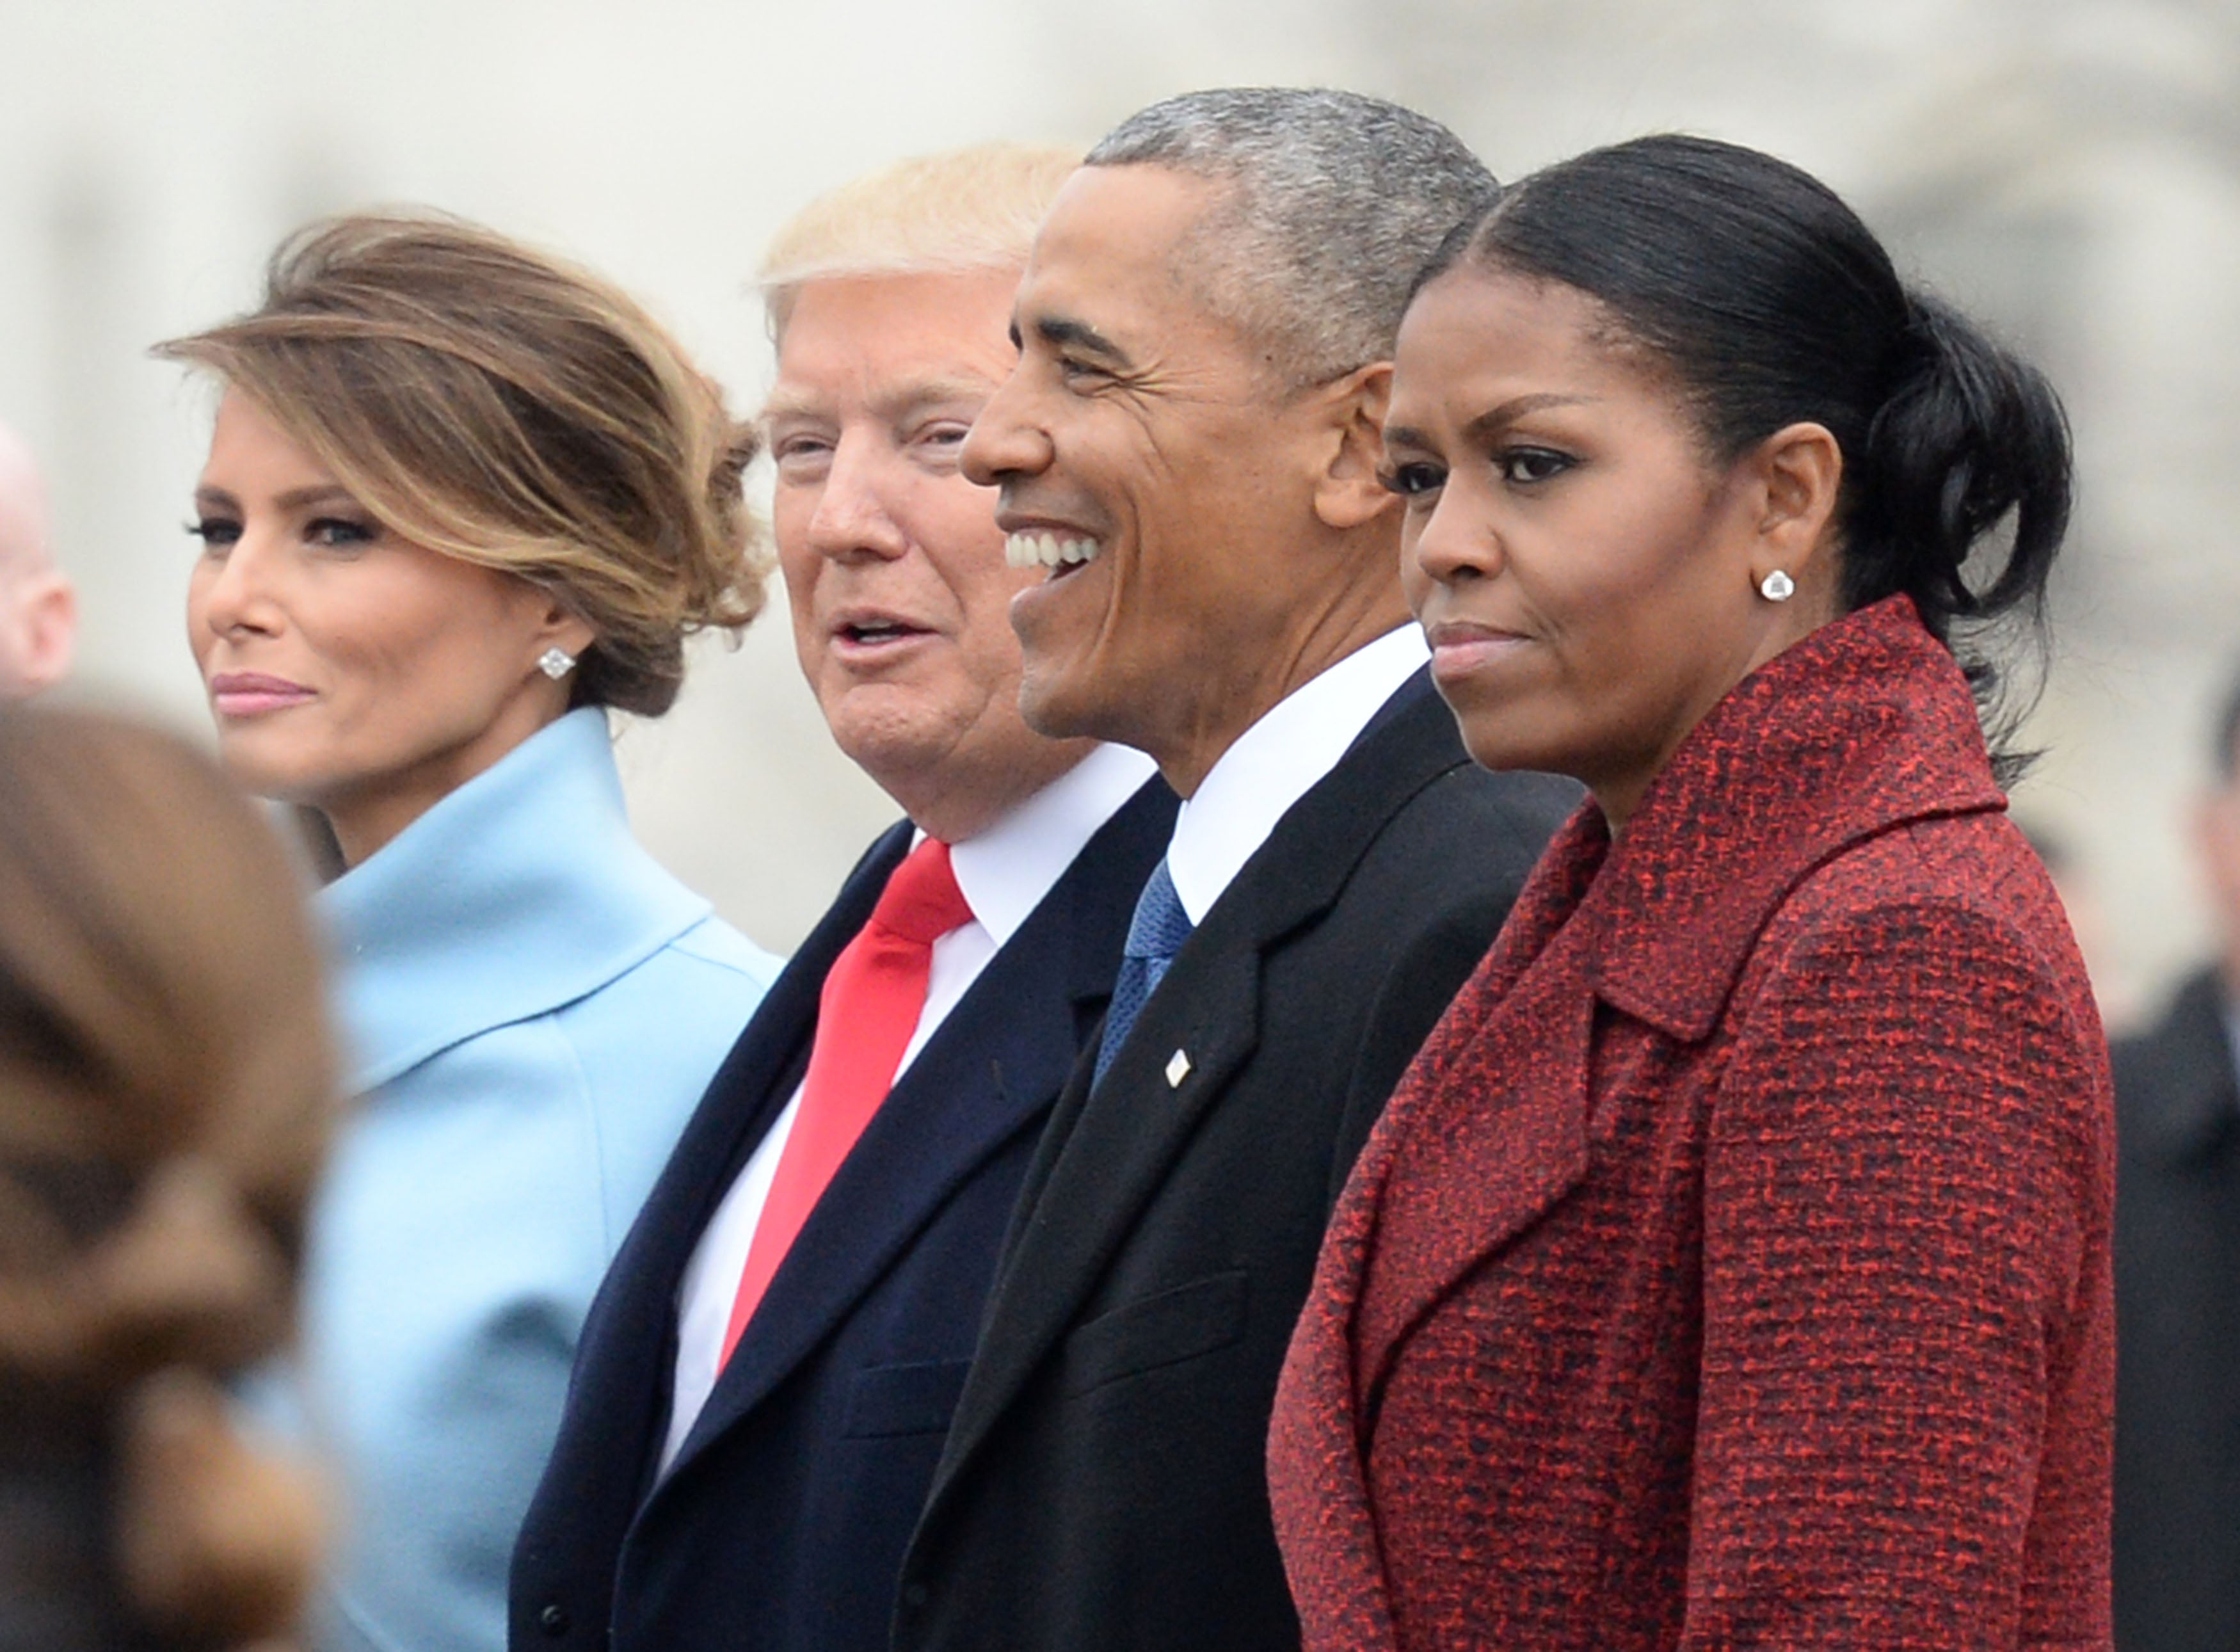 Michelle Obama with her husband and the incoming president and first lady on Inauguration Day in January 2017